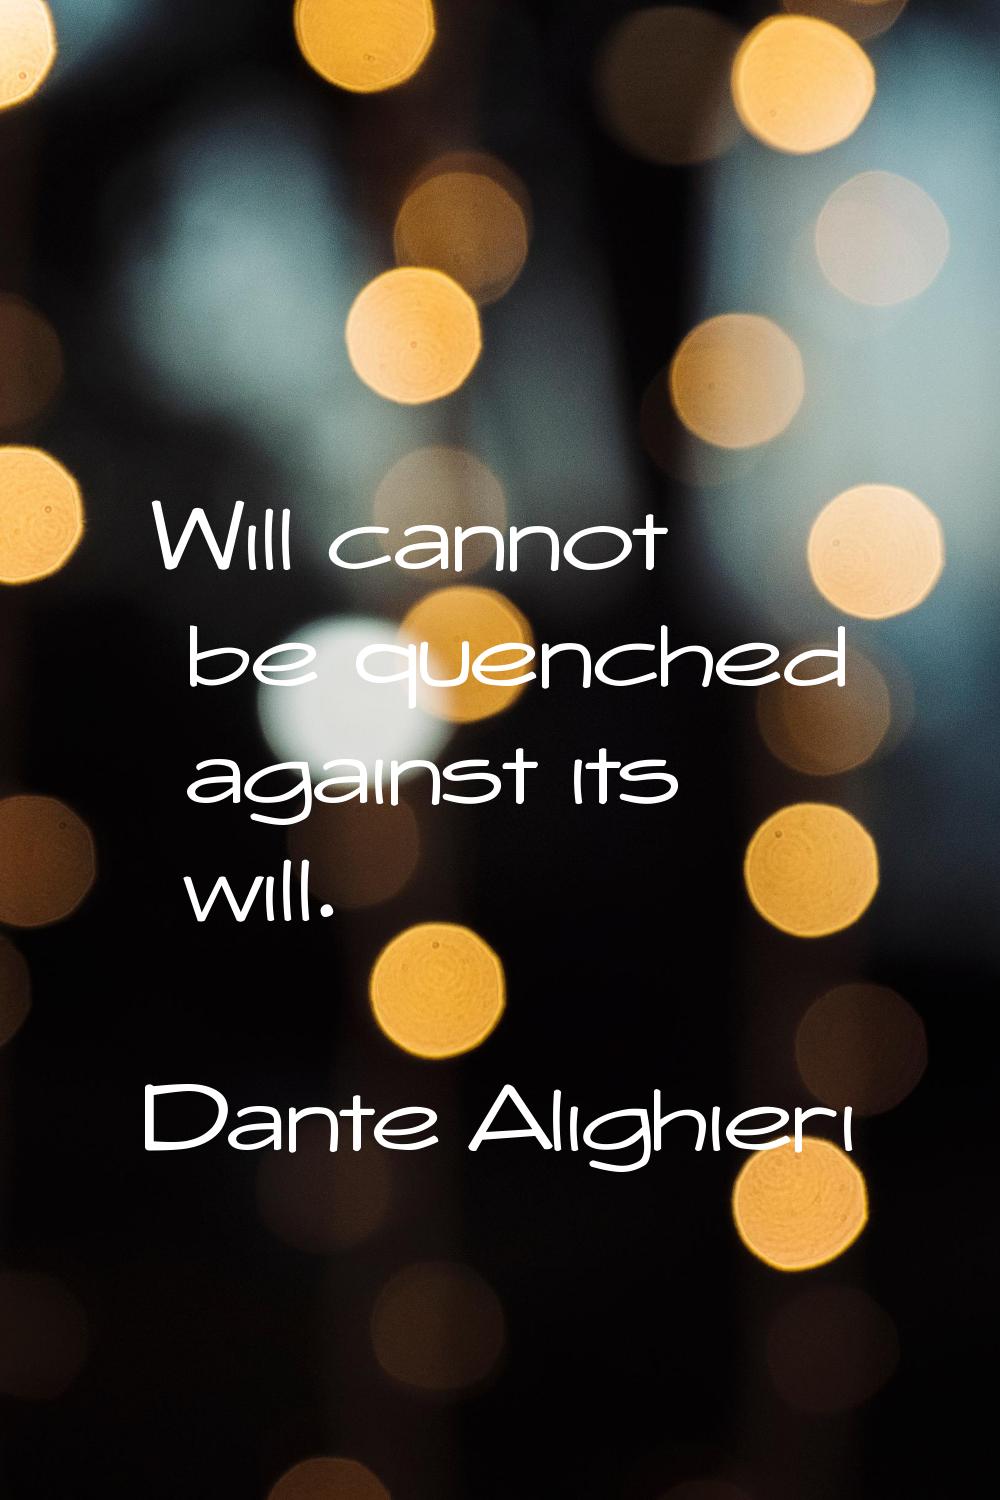 Will cannot be quenched against its will.